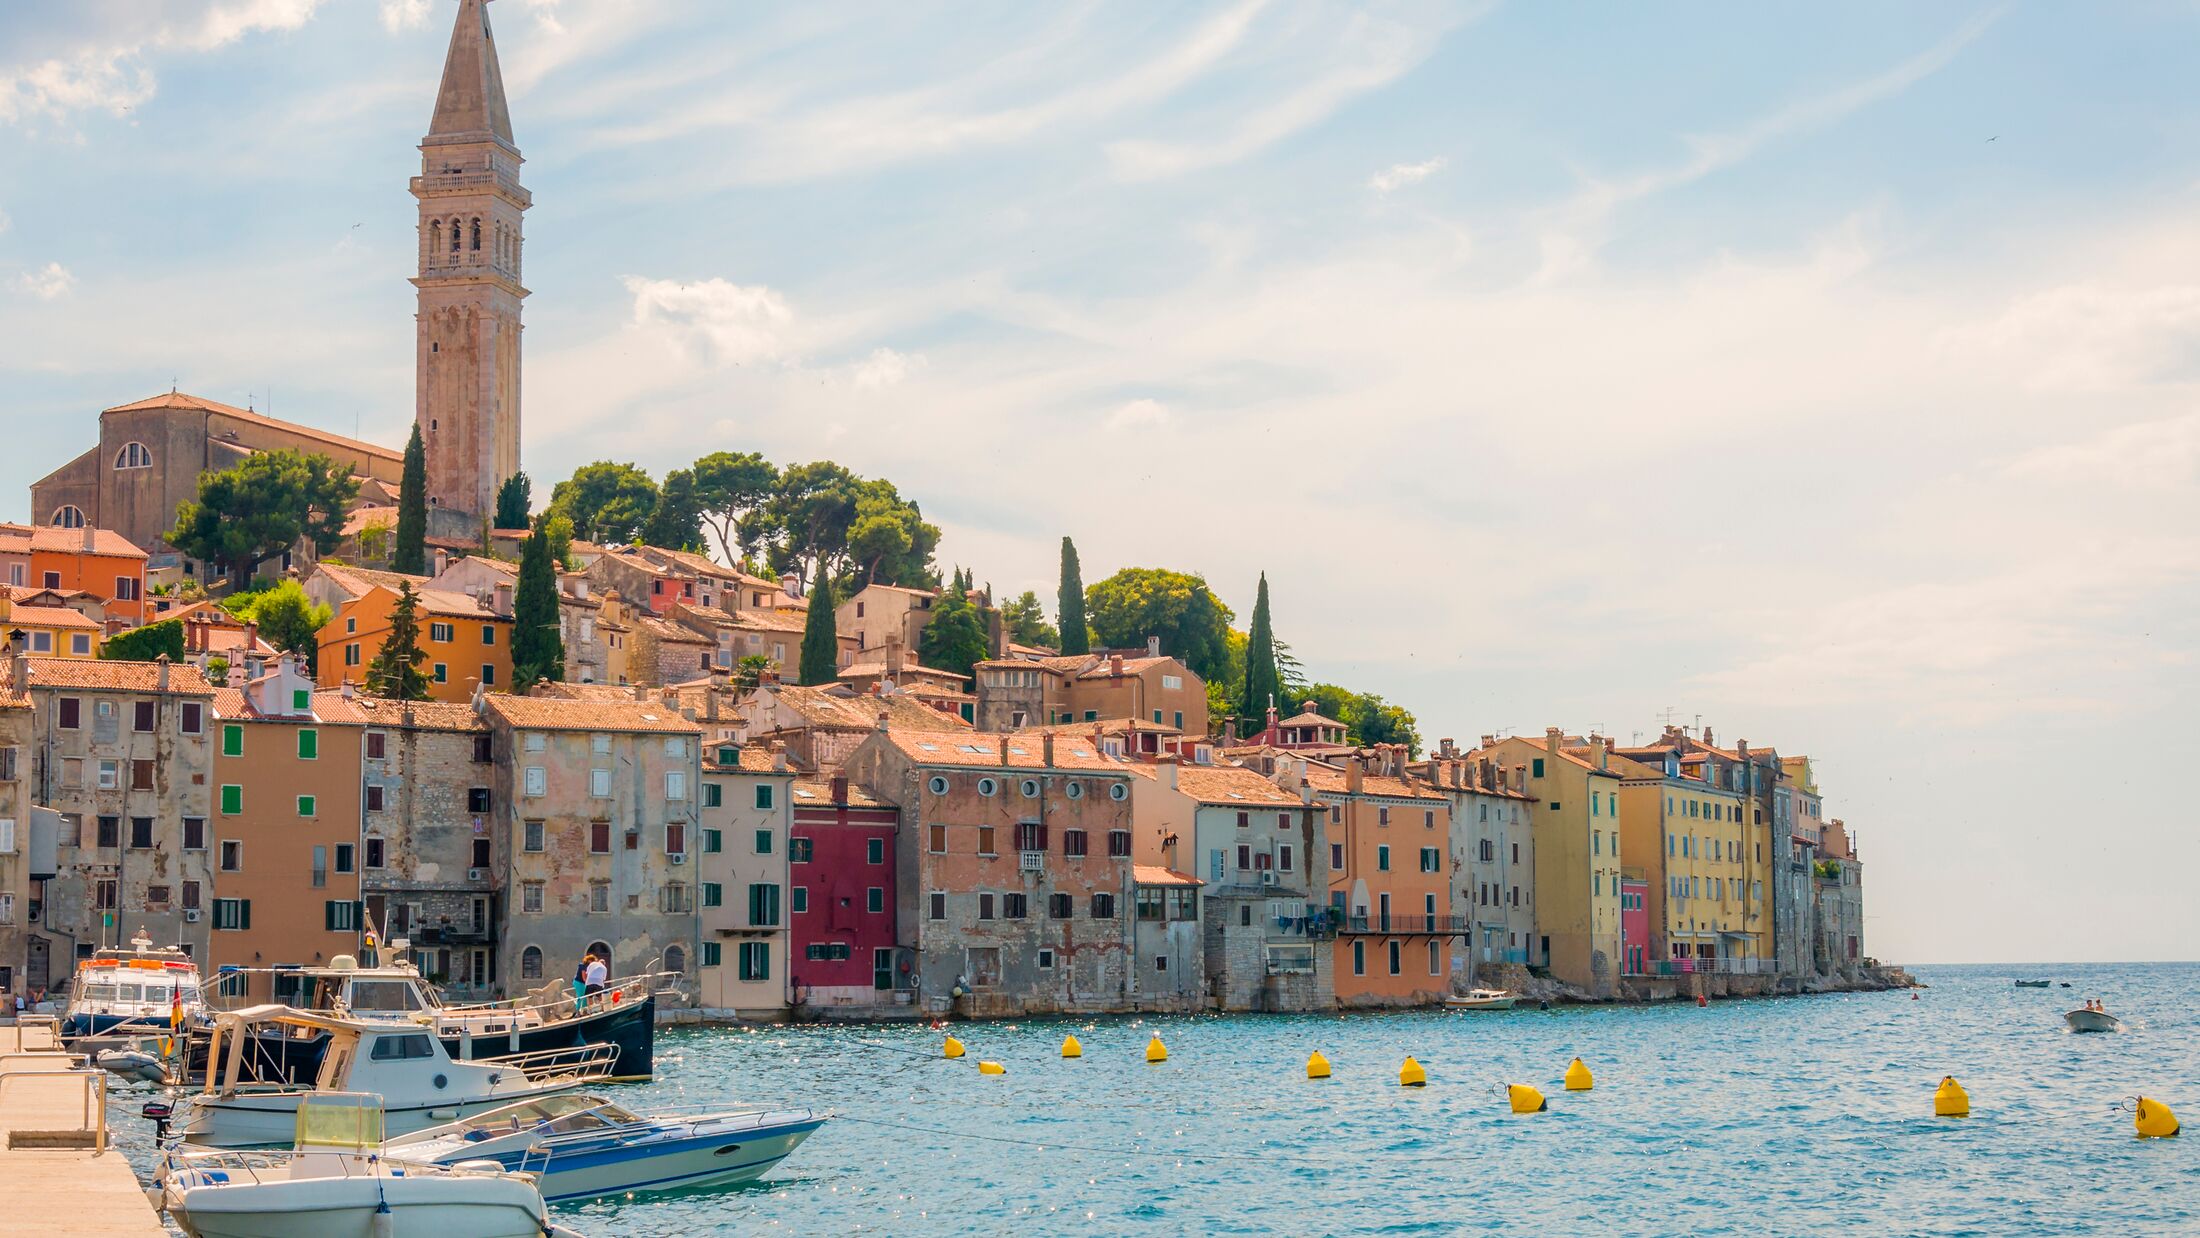 Old town of Rovinj in Croatia cityscape view. Medieval coastal architecture.